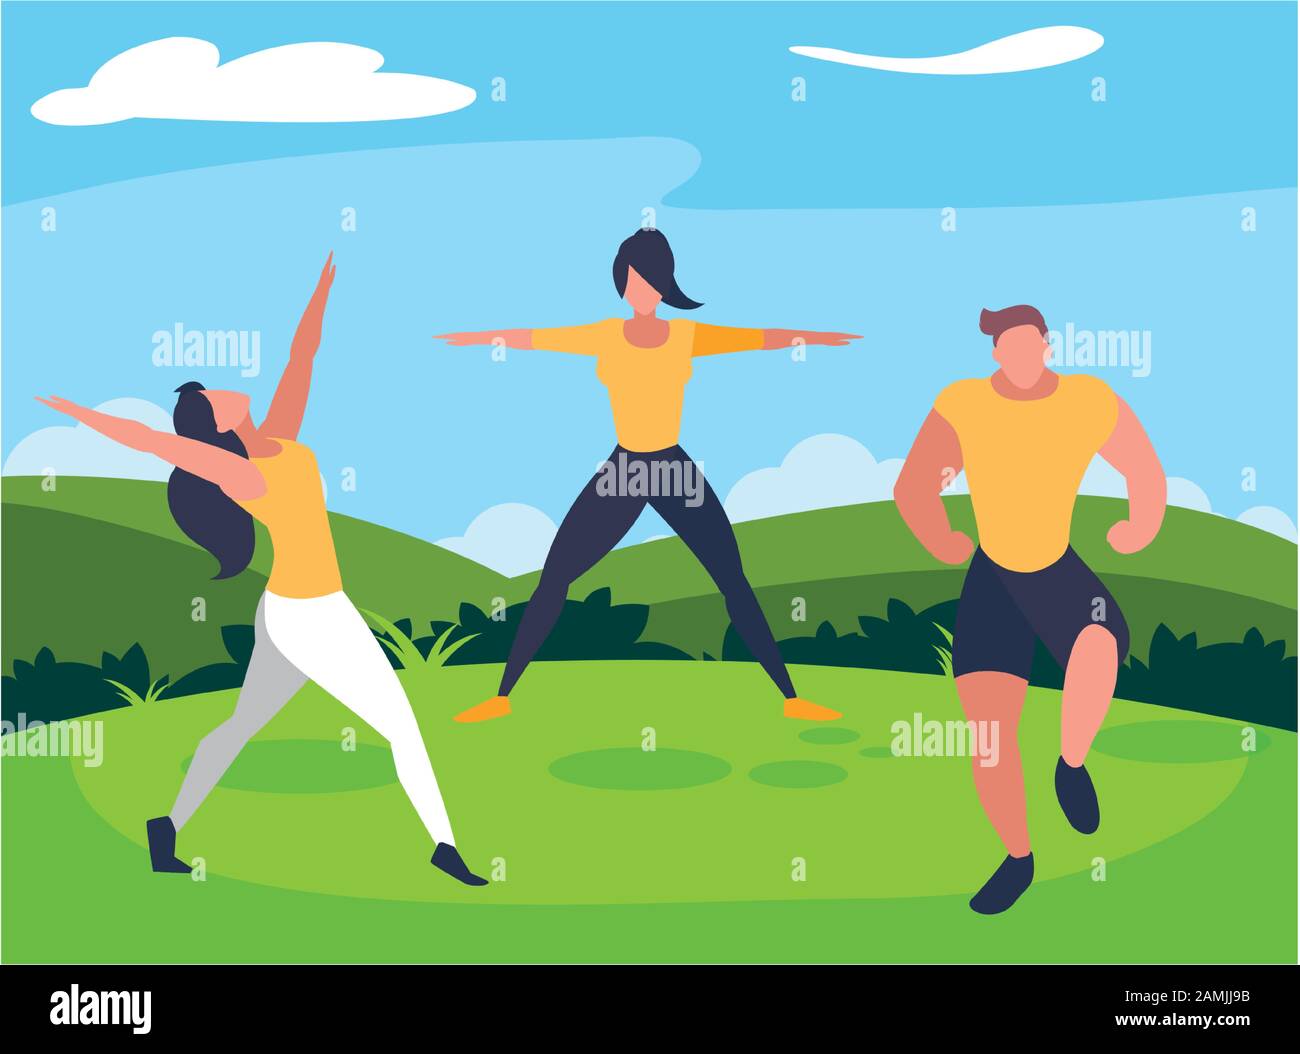 group of people exercising with background landscape vector